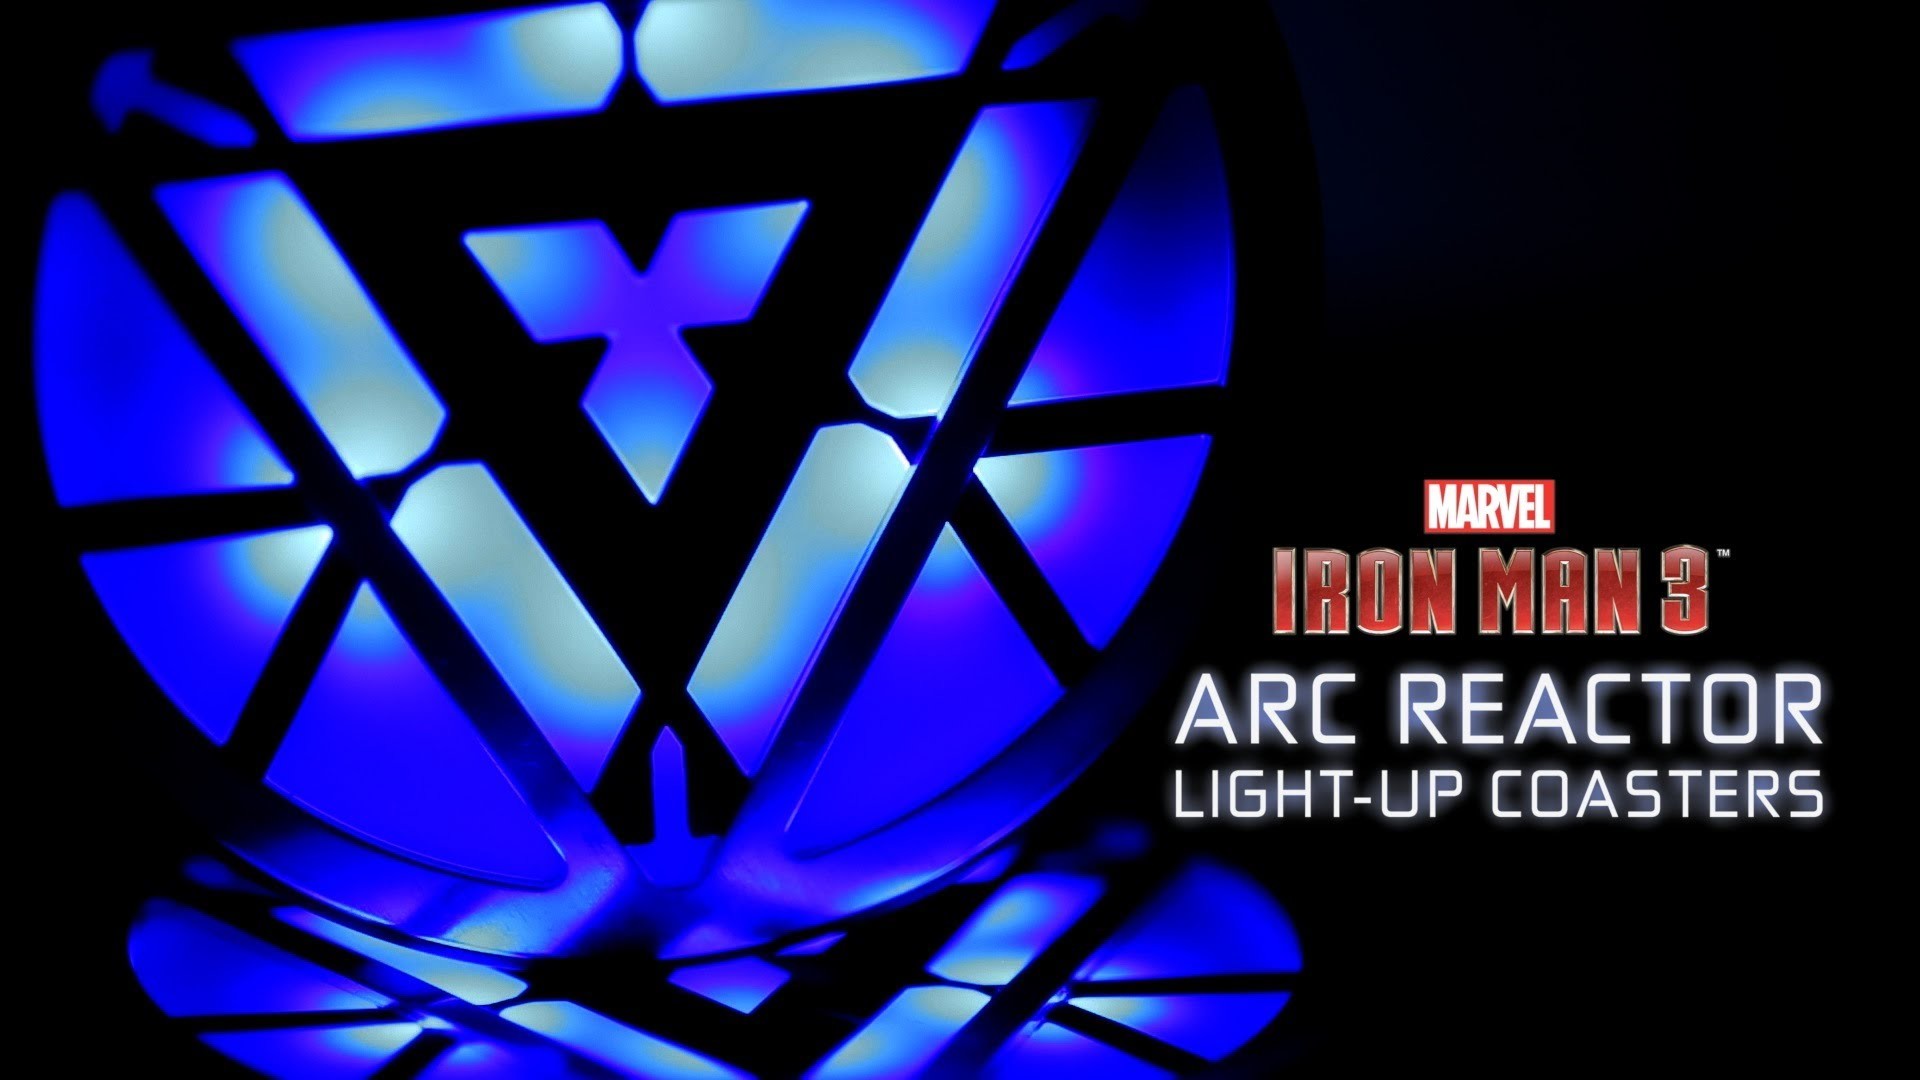 Marvel Iron Man 3 Arc Reactor Light Up Coasters from ThinkGeek – YouTube